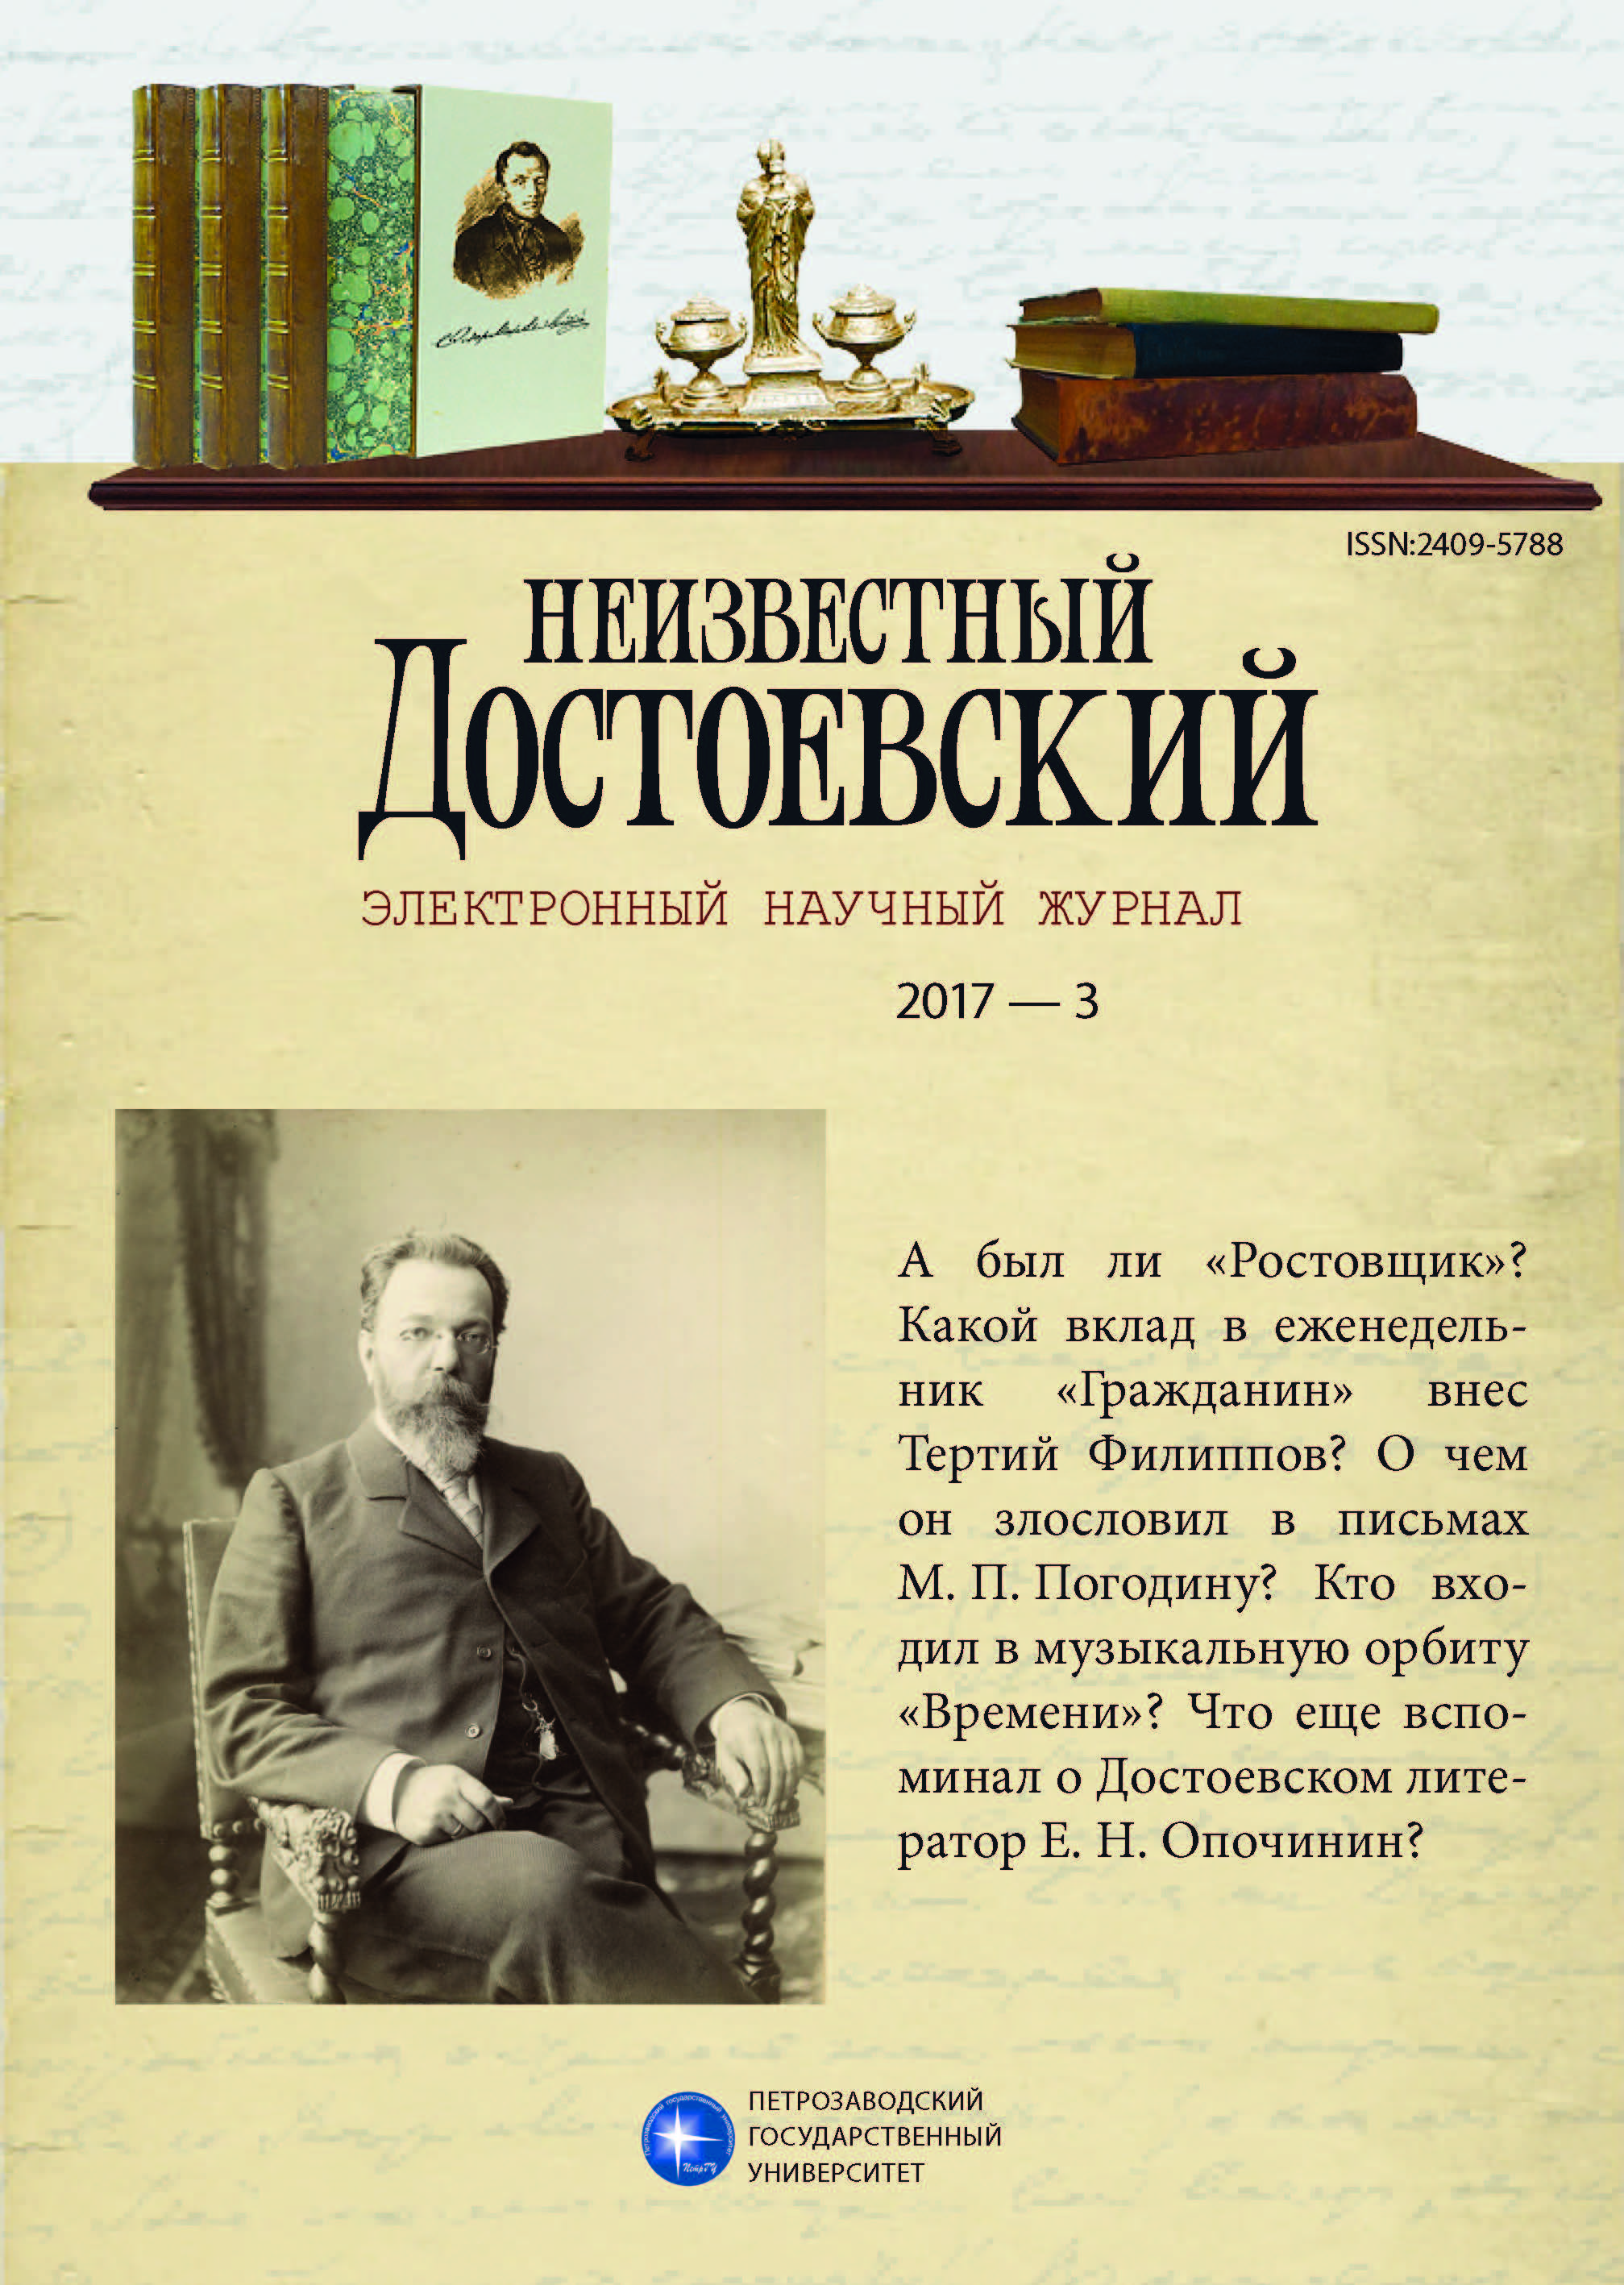 Did Dostoevsky Have an Unrealized Intention Known as “The Usurer”? Cover Image